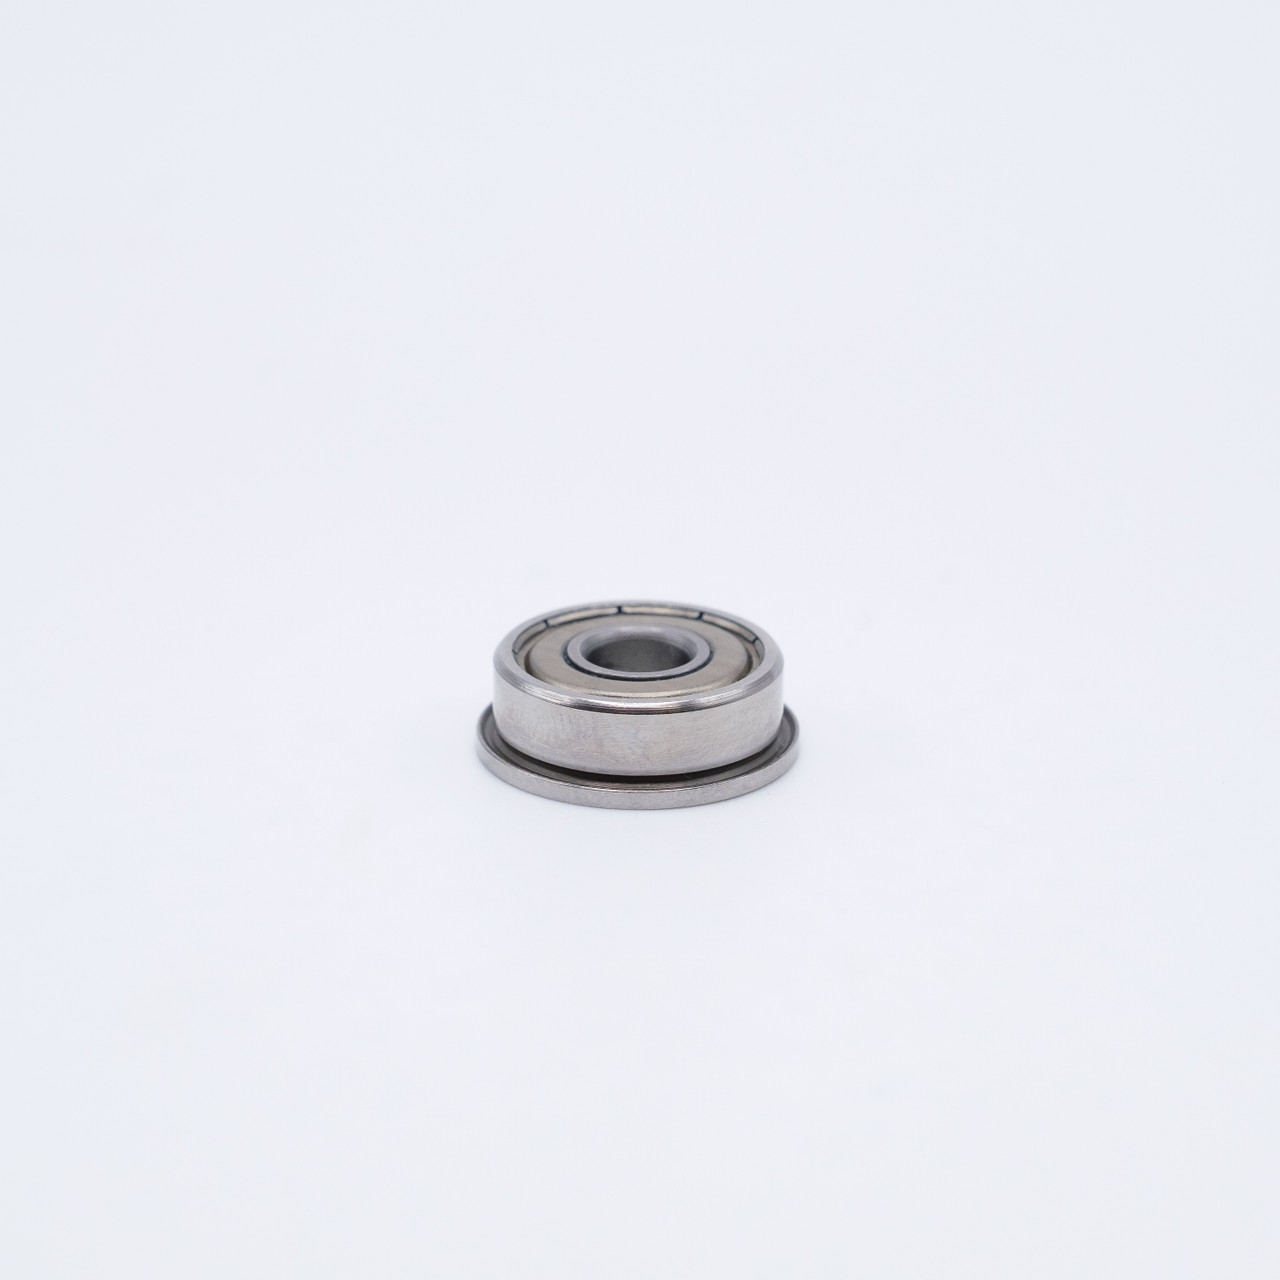 SF684ZZ Stainless Steel Flanged Miniature Ball Bearing 4x9x4mm Top View